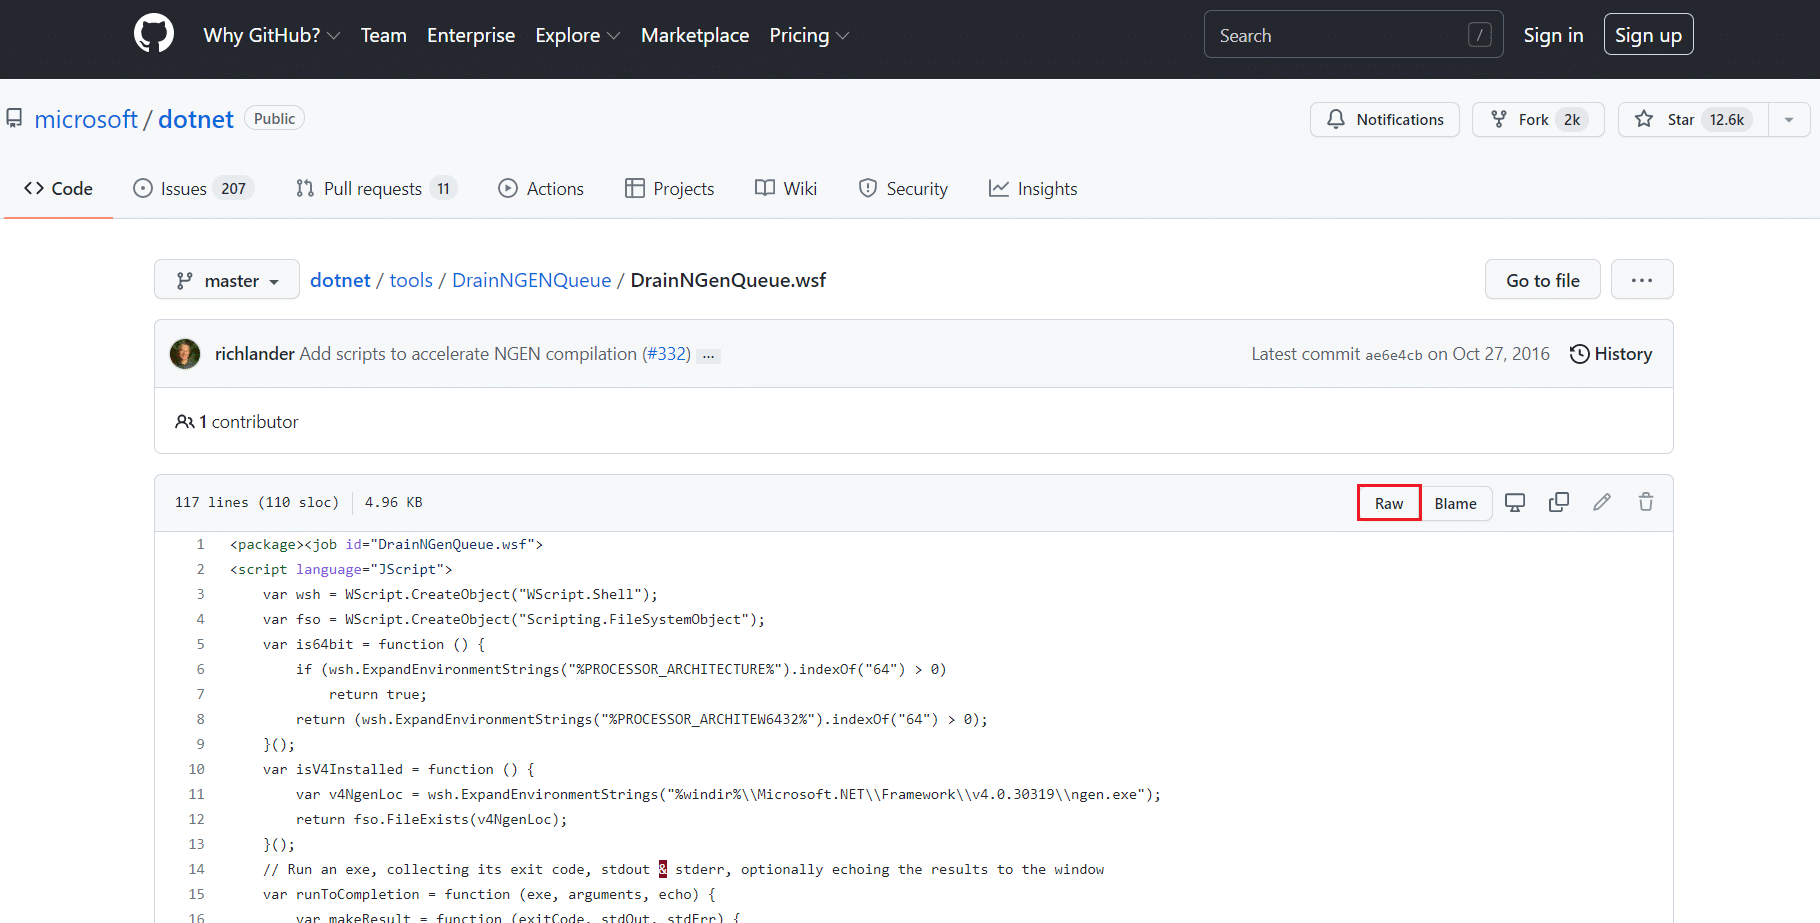 click on Raw option in github page